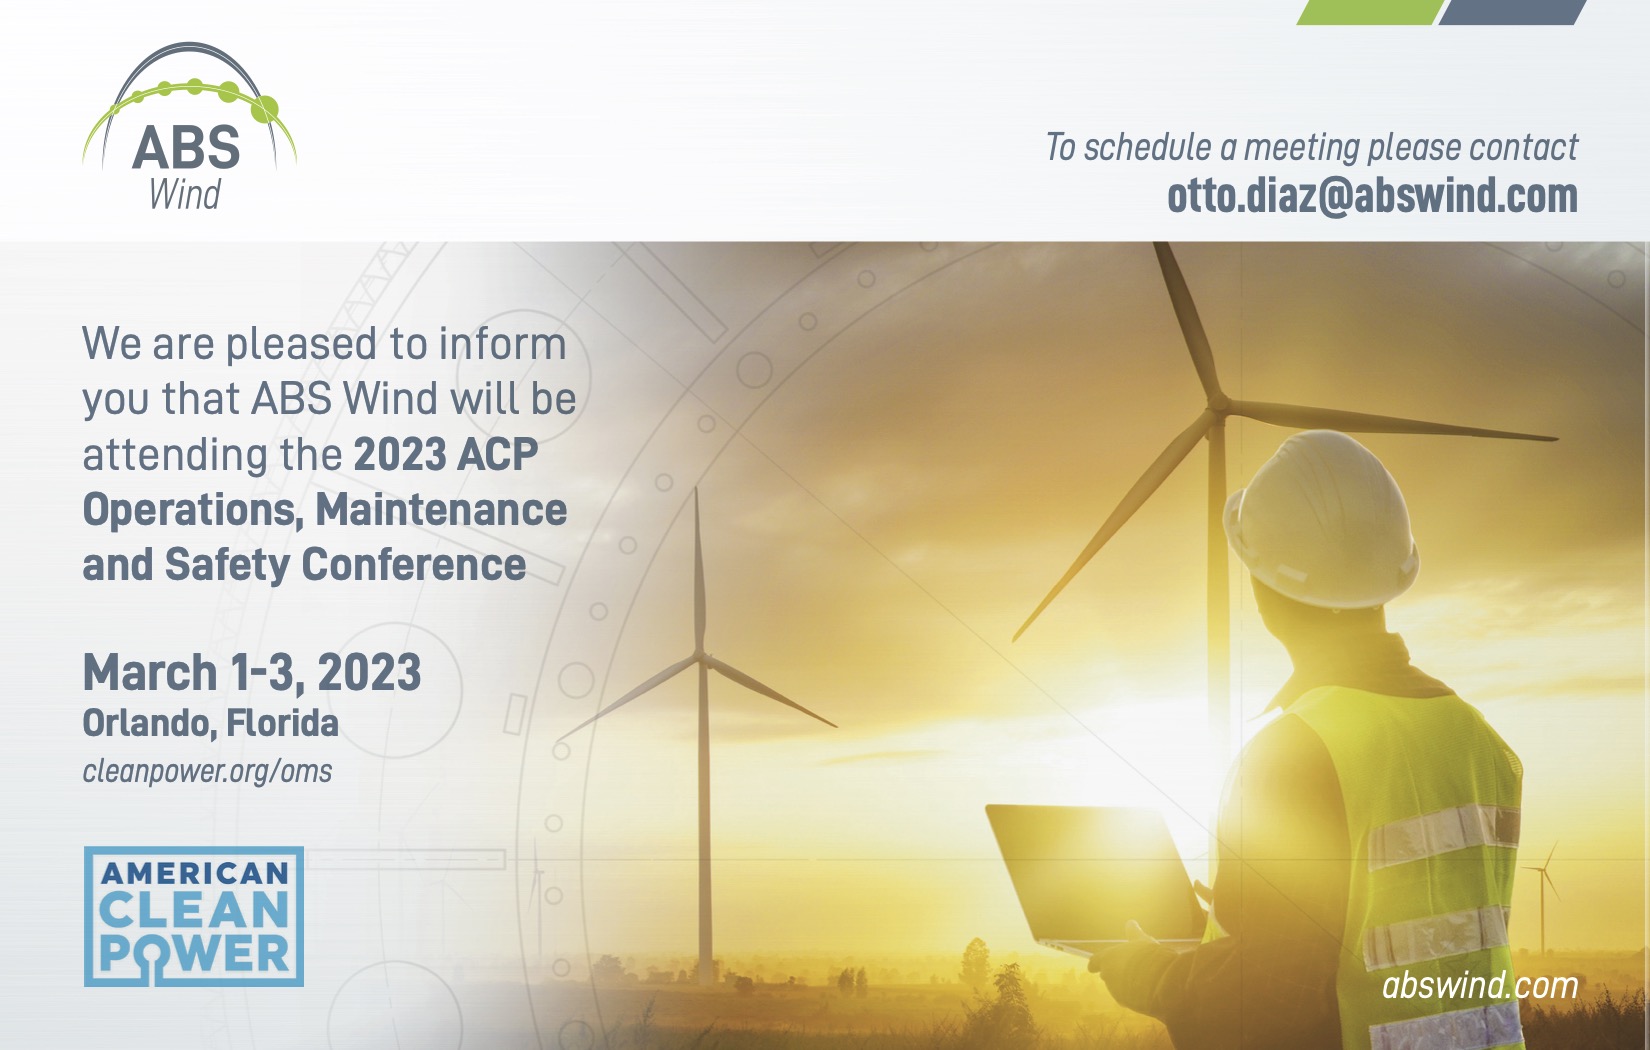 ABS Wind invites you to the ACP Operations, Maintenance and Safety Conference 2023